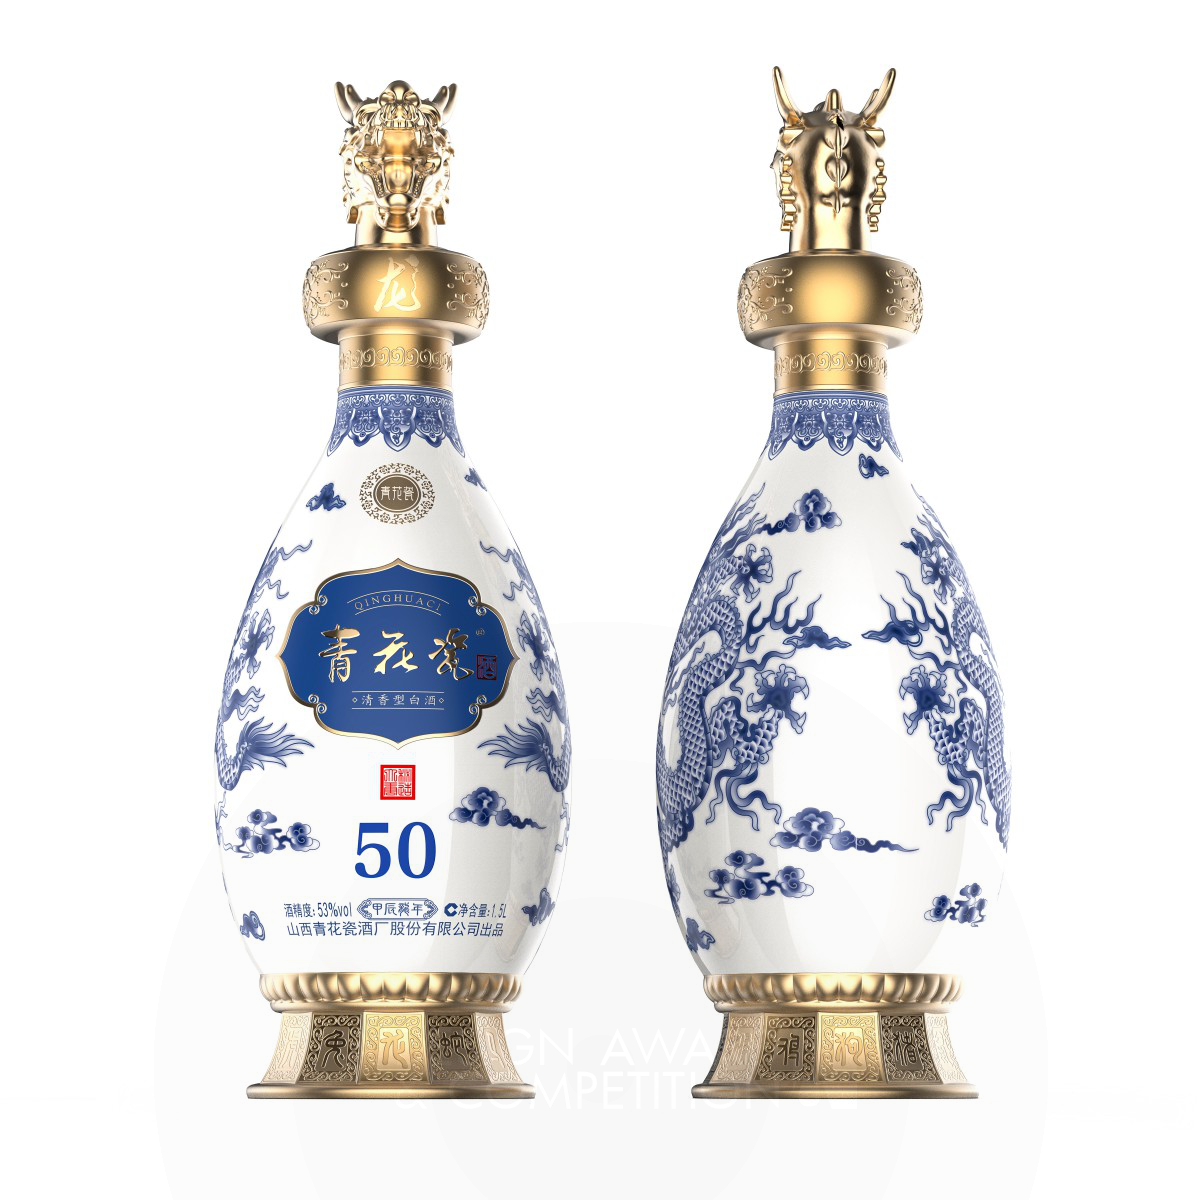 Chengdu Fenggu Muchuang wins Bronze at the prestigious A' Packaging Design Award with White and Blue Porcelain Packaging.